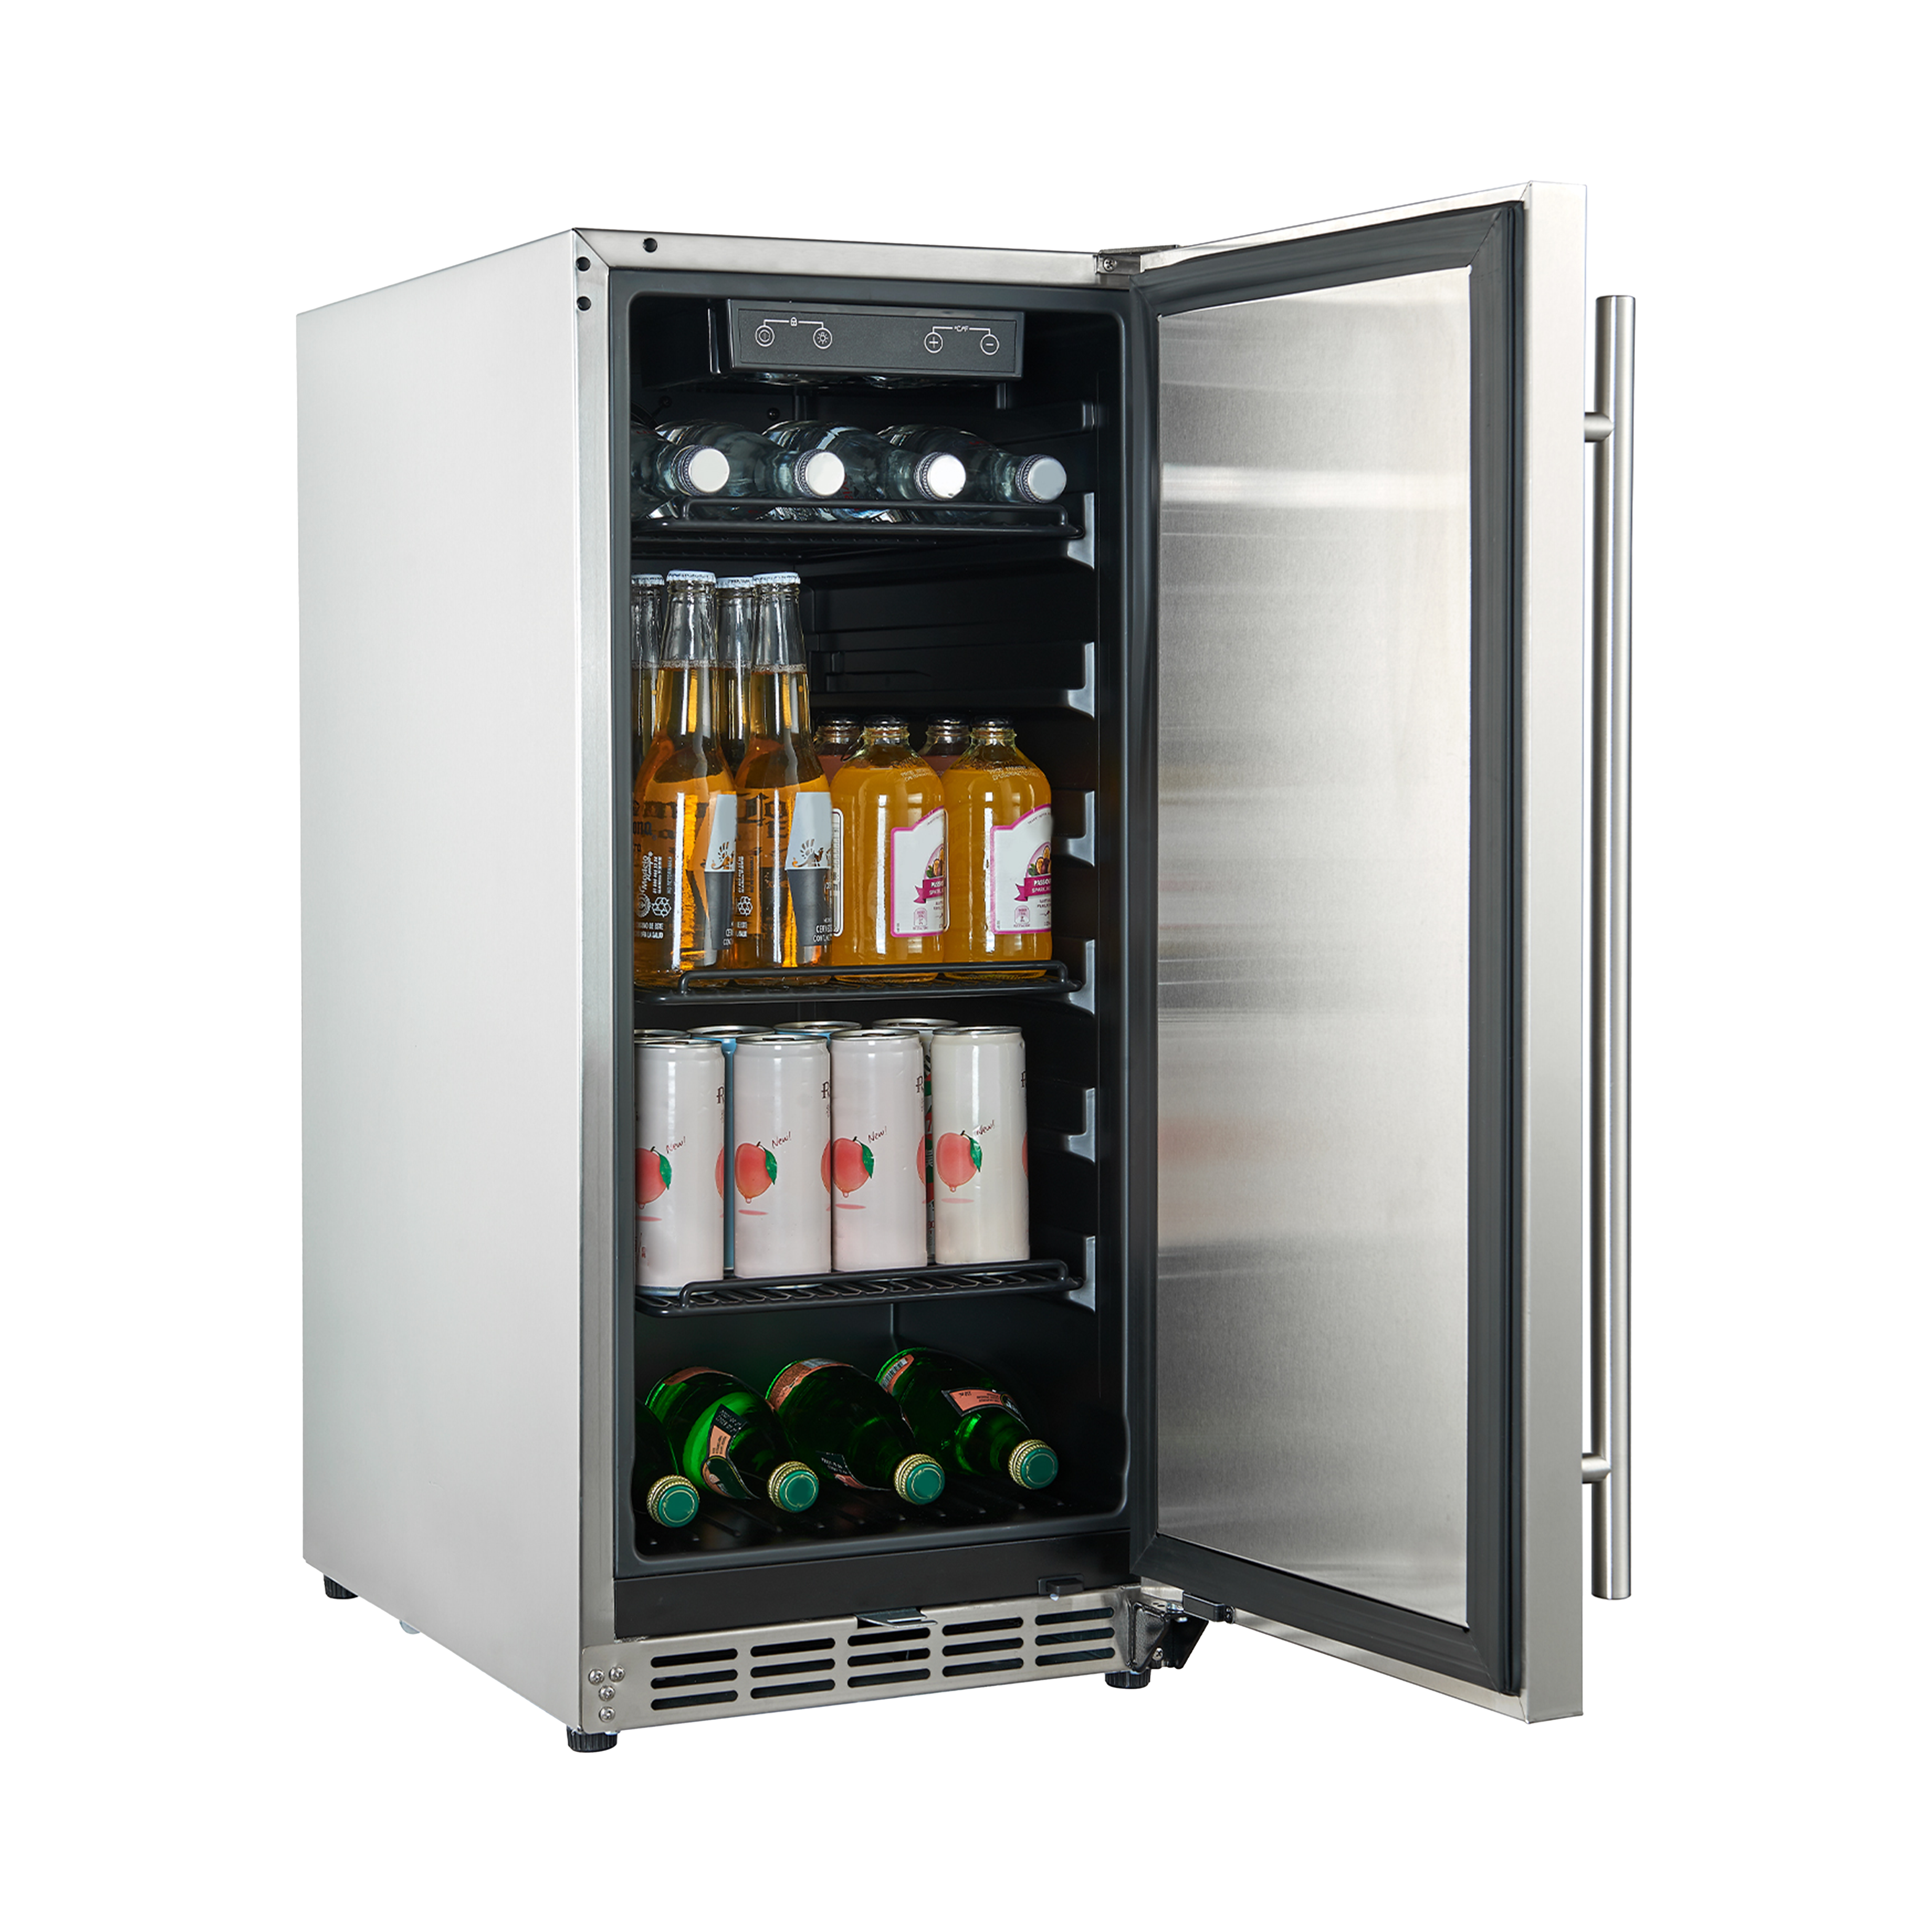 Side view of a 3.2 Cu Ft Undercounter Beverage Outdoor Refrigerator with the door open, displaying a digital temperature control panel and filled with beverage bottles.